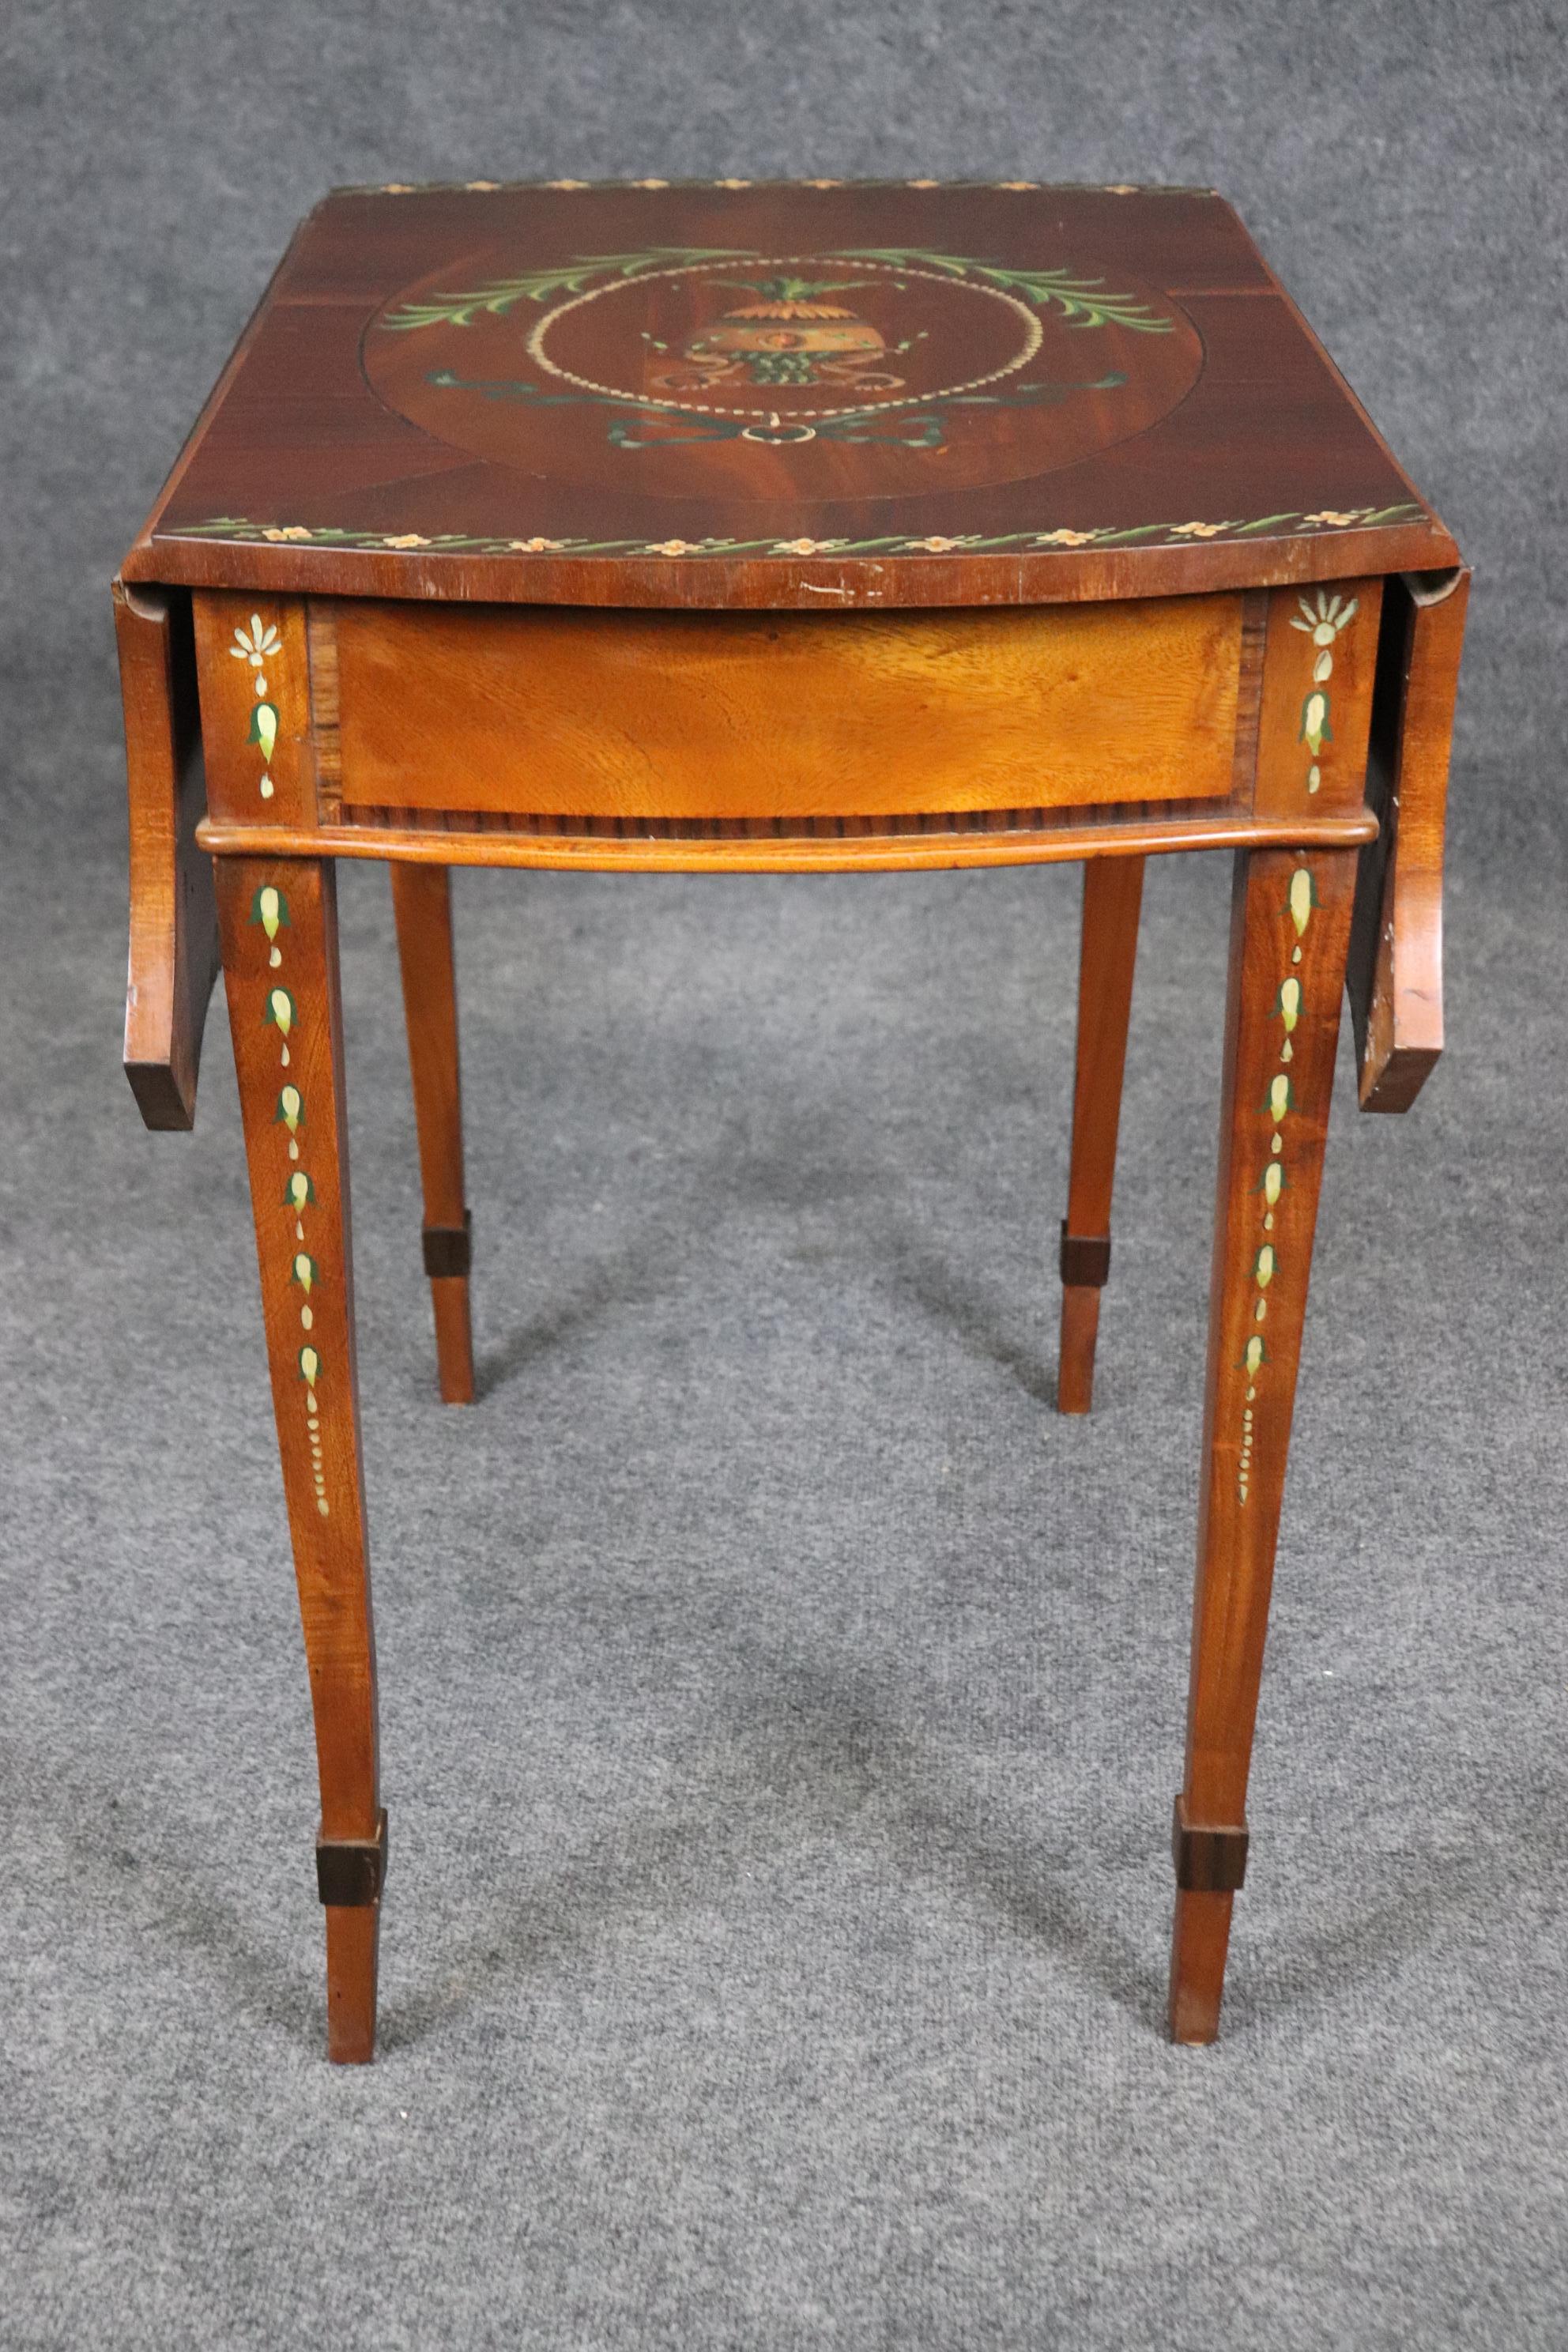 Rare Adams Paint Decorated English Pembroke Table Circa 1920 For Sale 1